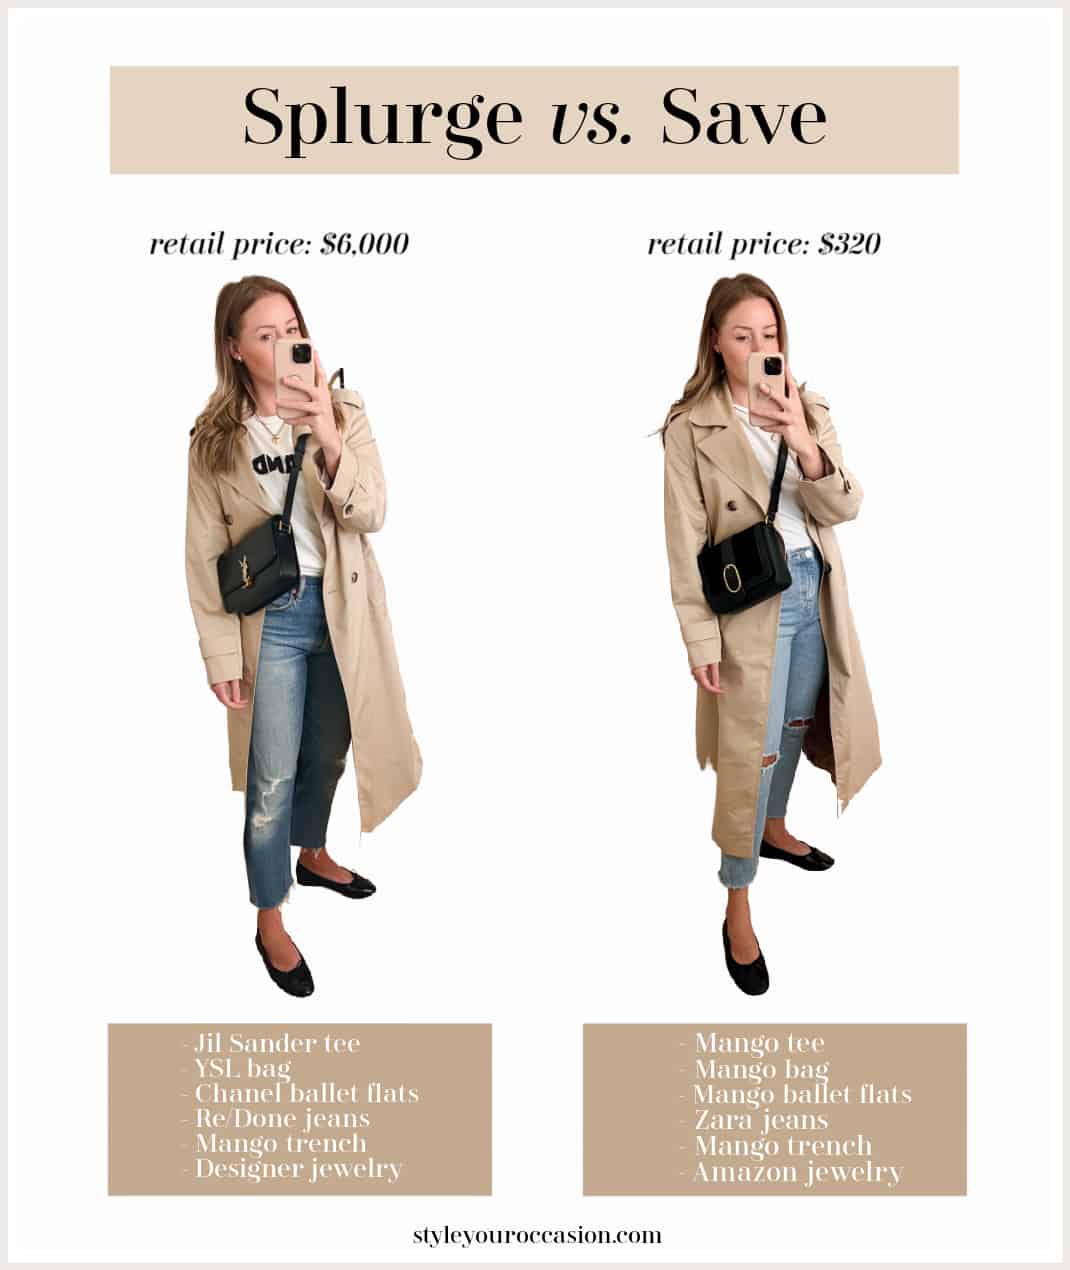 image comparing two outfits, one expensive with designer items and the other with budget-friendly pieces